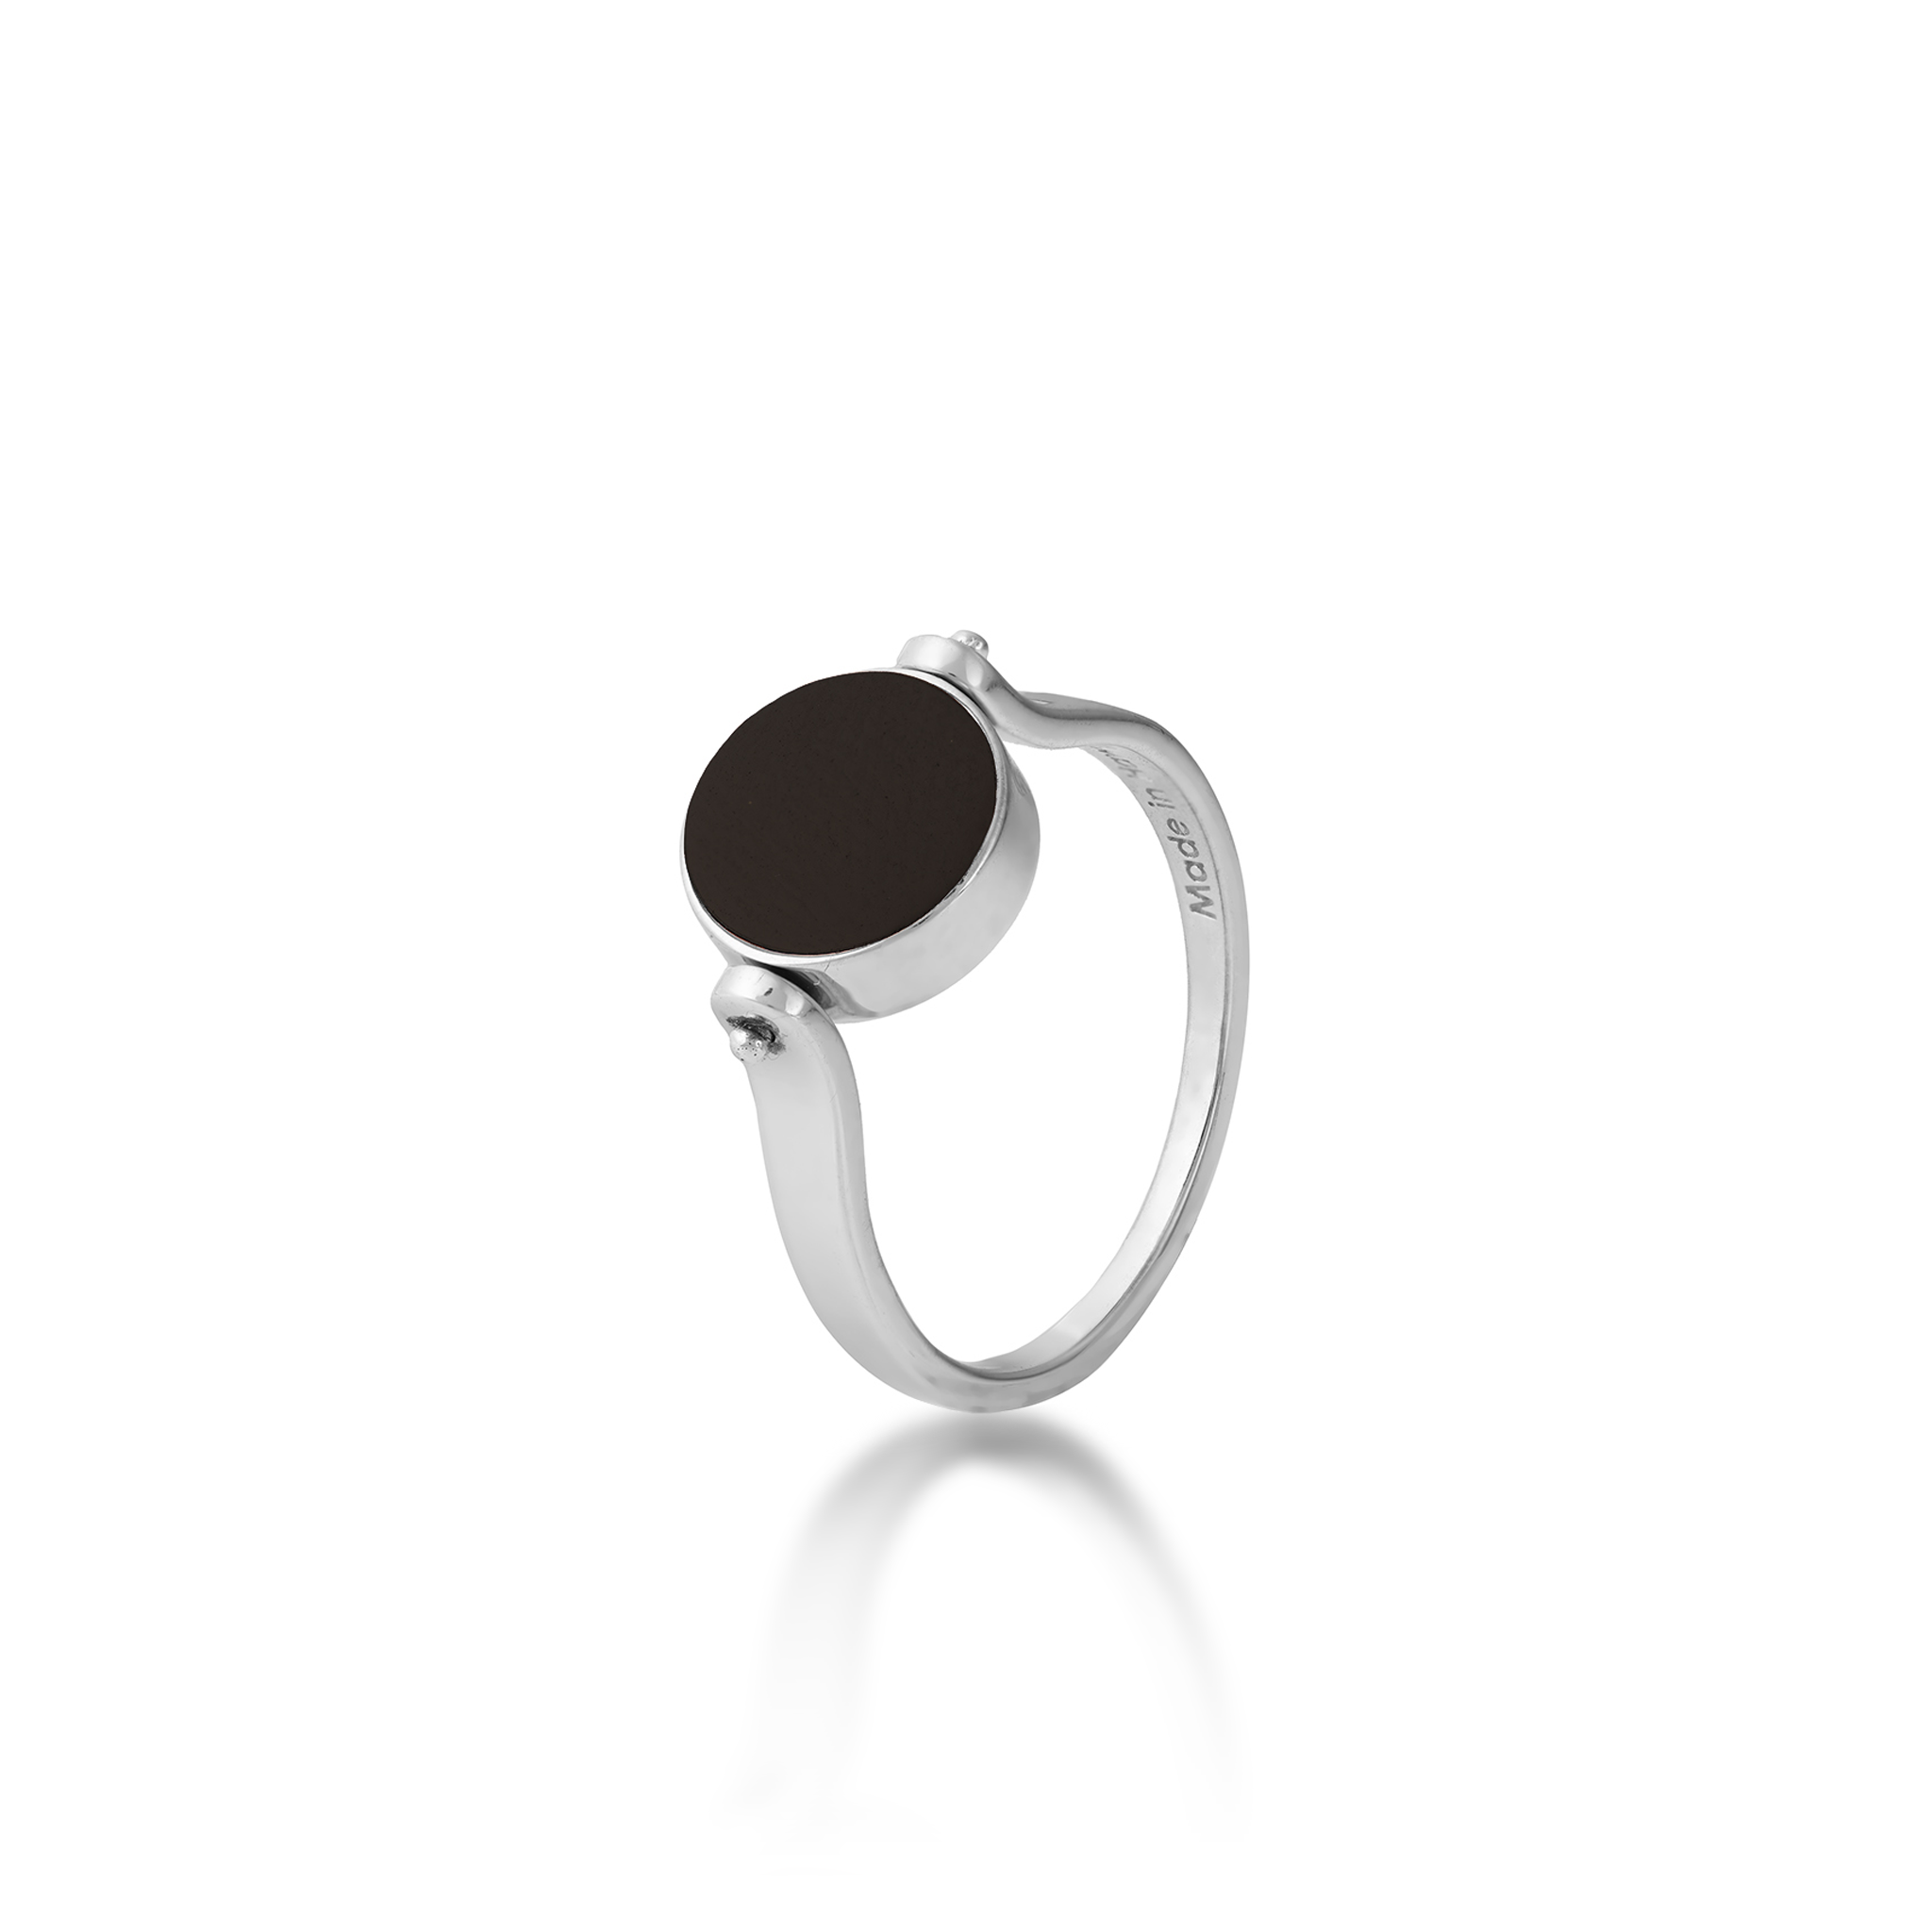 Eclipse Flipside Black Coral & Mother of Pearl Ring in White Gold - 9mm